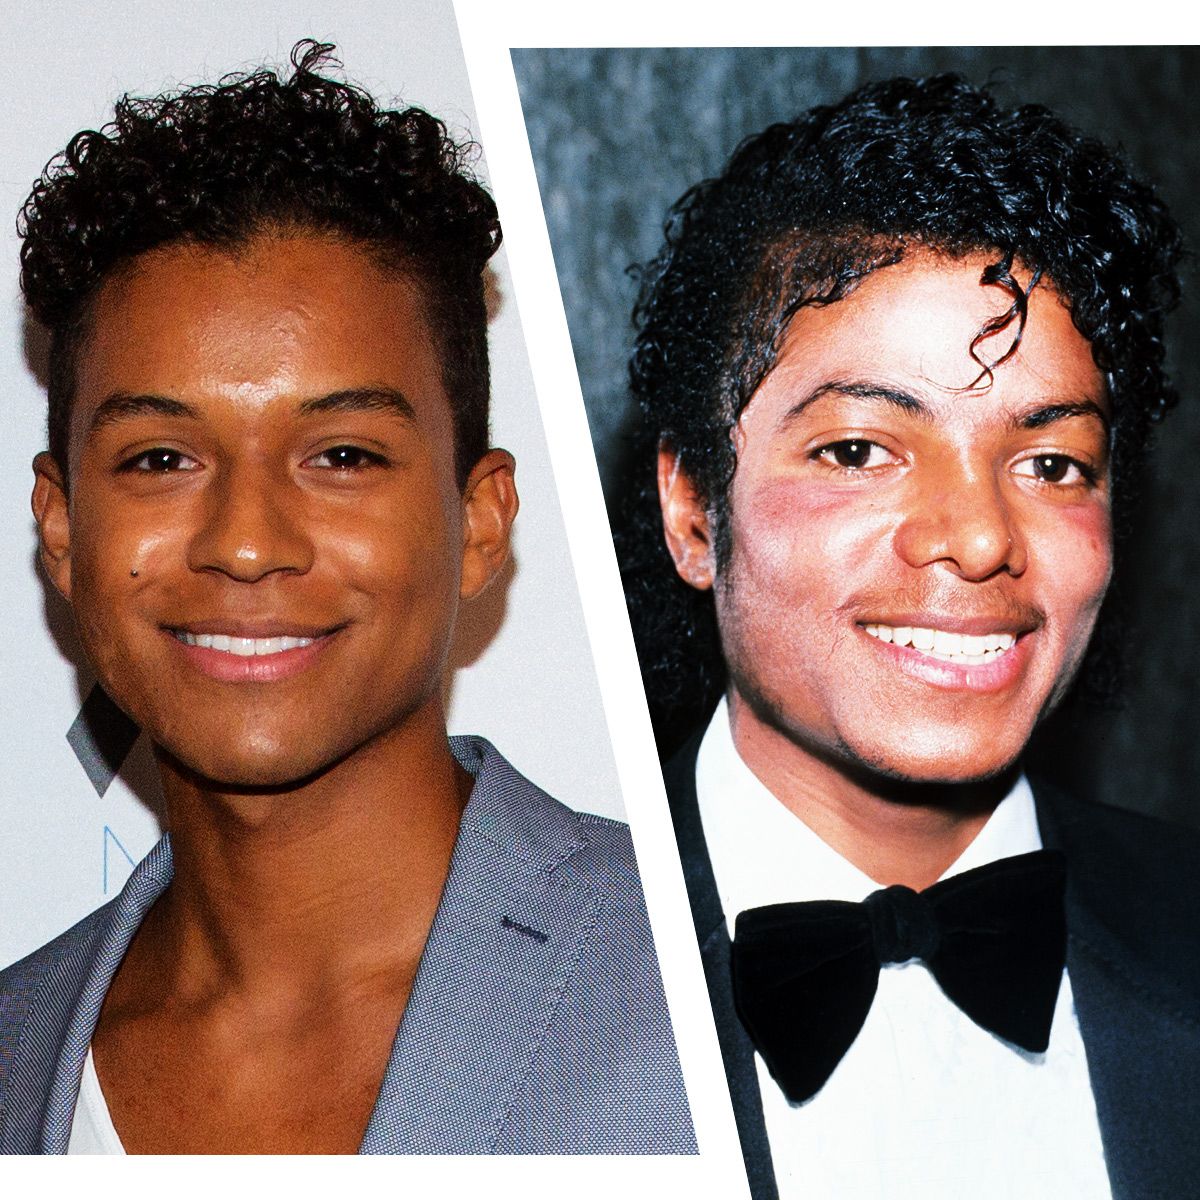 See cast of Michael Jackson biopic and real people they're playing